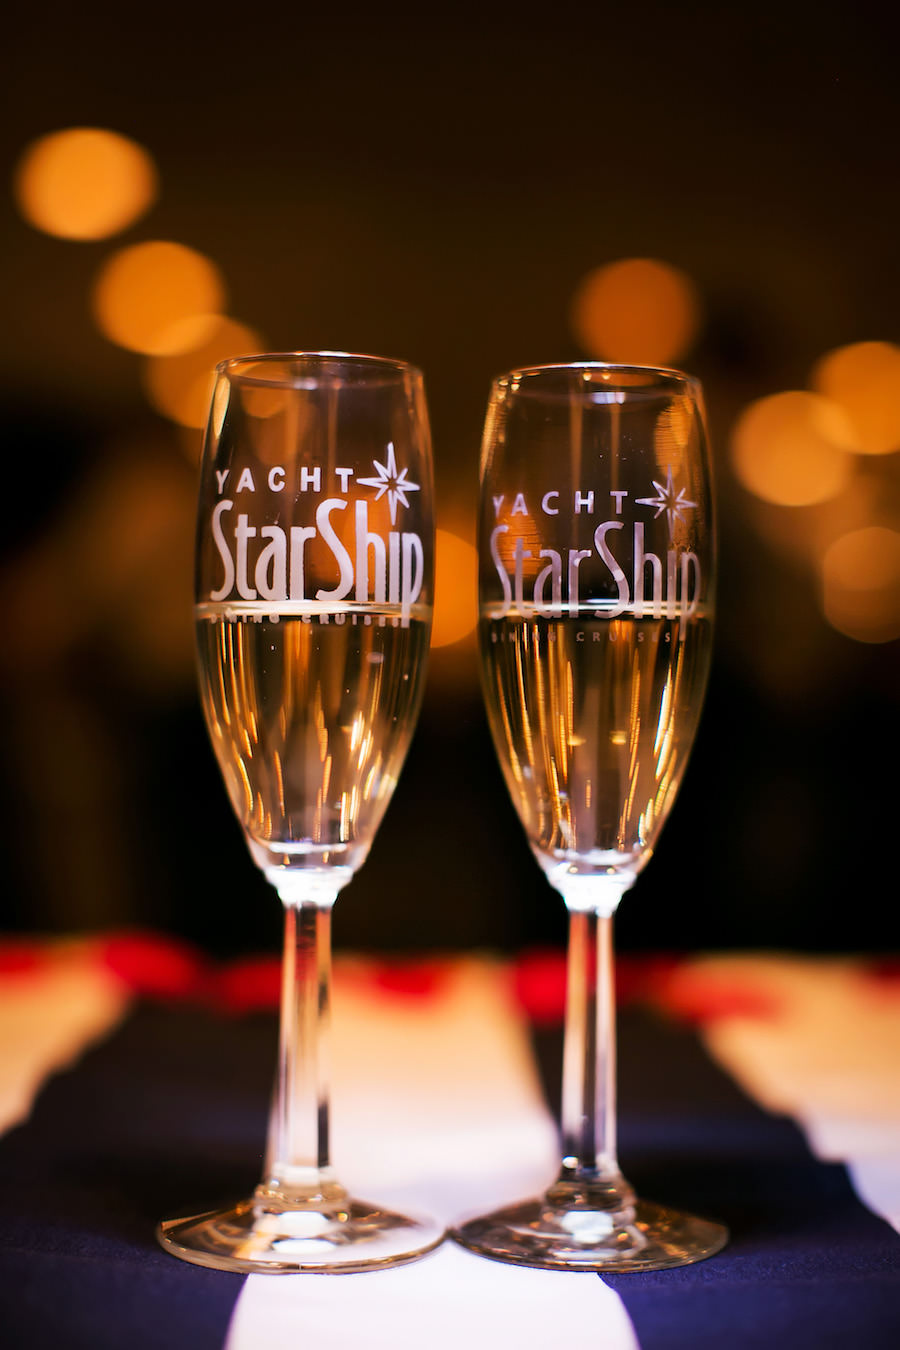 Wedding Champagne Flutes Waterfront Downtown Tampa Wedding Venue Yacht StarShip